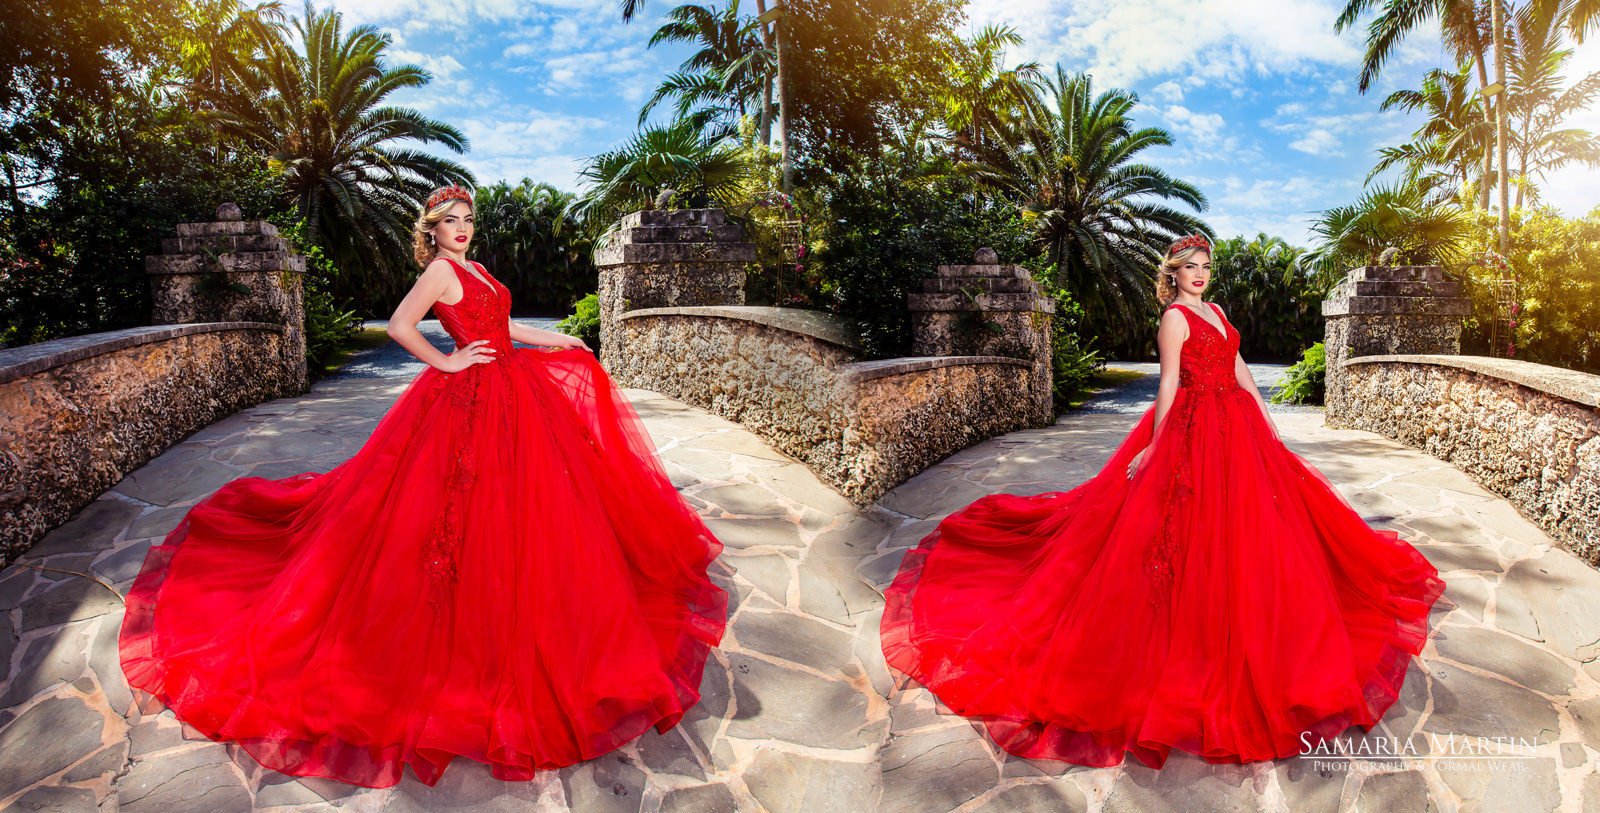 Fashion photoshoot, best quinceanera pictures in Miami, Samaria Martin Photographer, where to rent quinceanera dresses, quinceanera collection 4